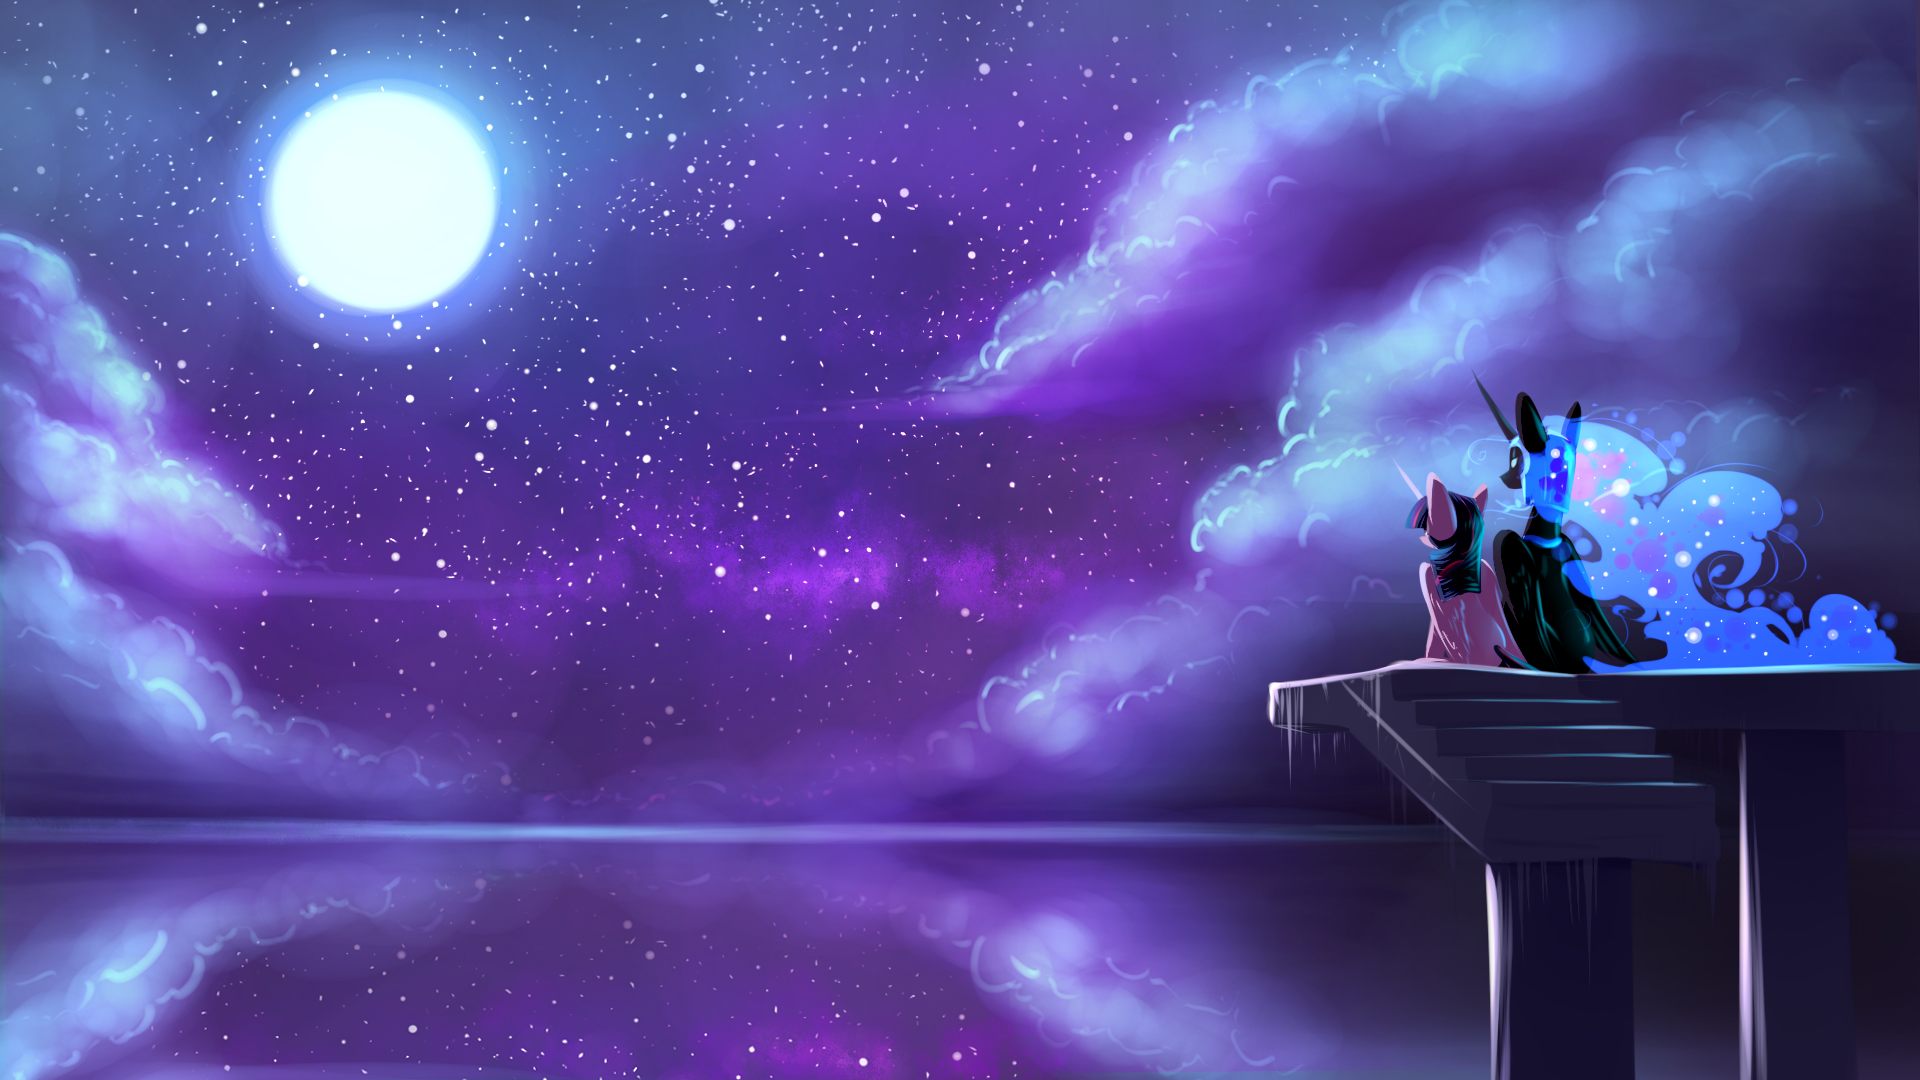 night_sky_by_underpable-d8j83mw.png